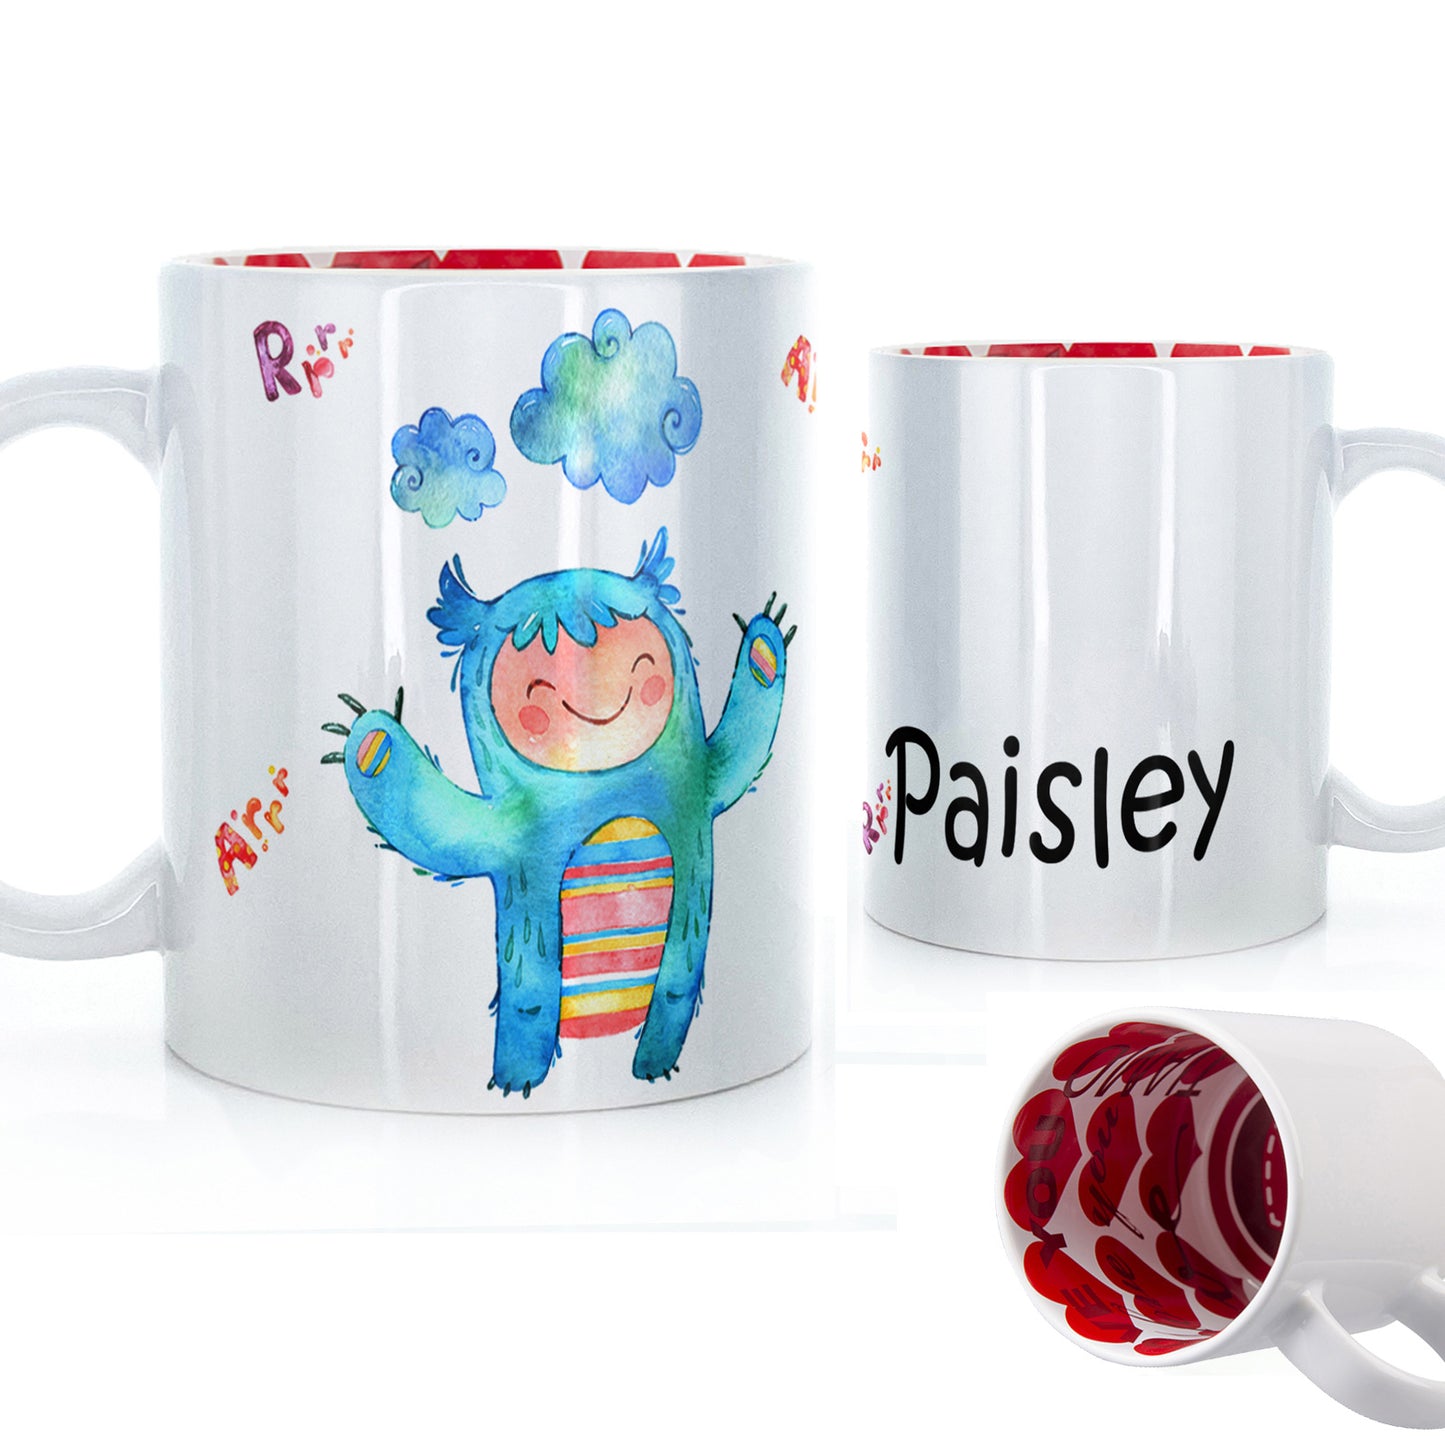 Personalised Mug with Childish Text and Furry Blue Growling Clouded Monster